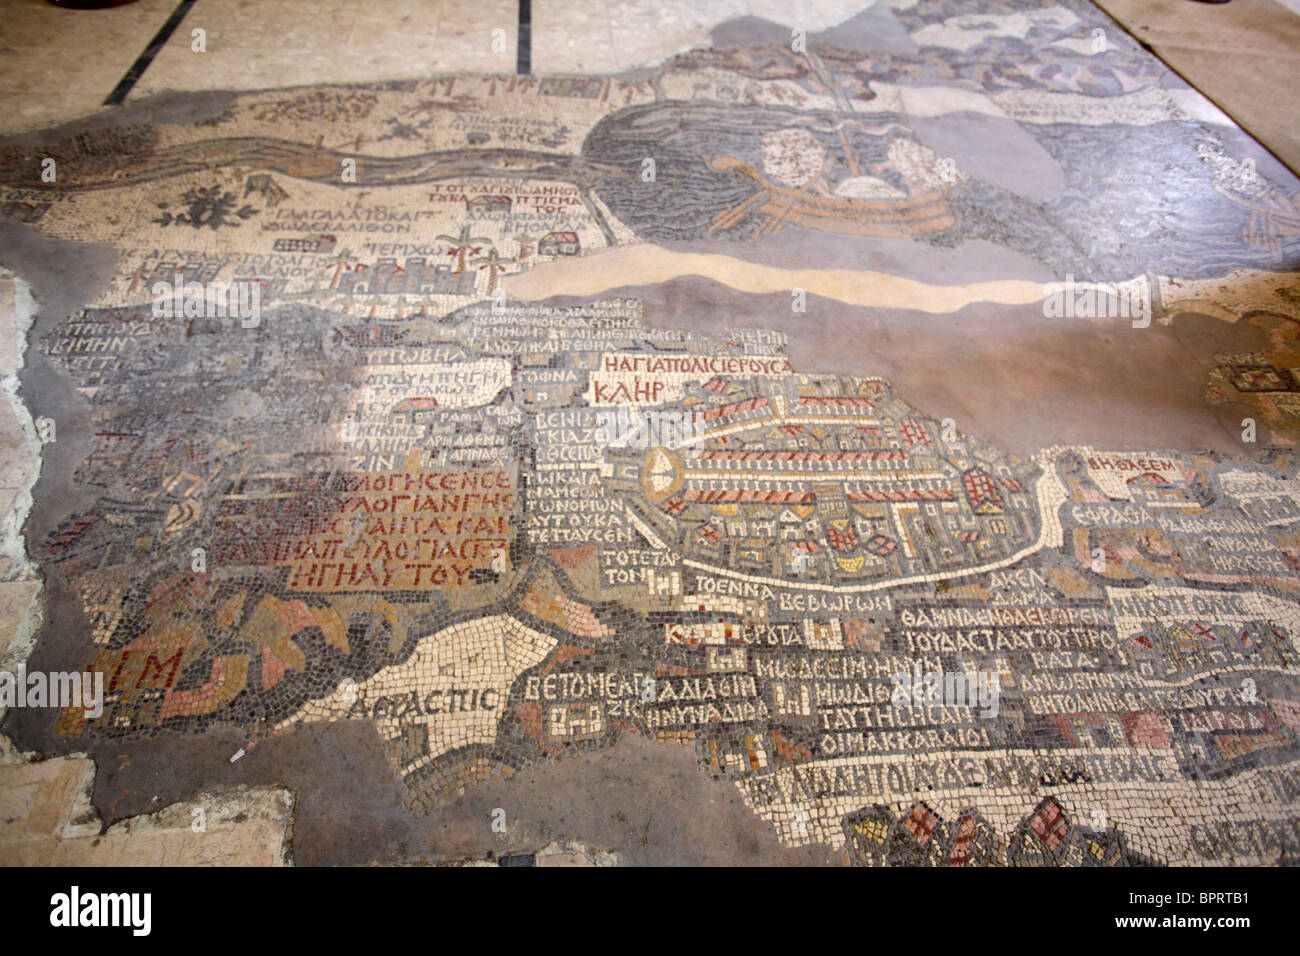 View of the magnificent Mosaic Map of the Holy Land, Madaba, Jordan Stock Photo